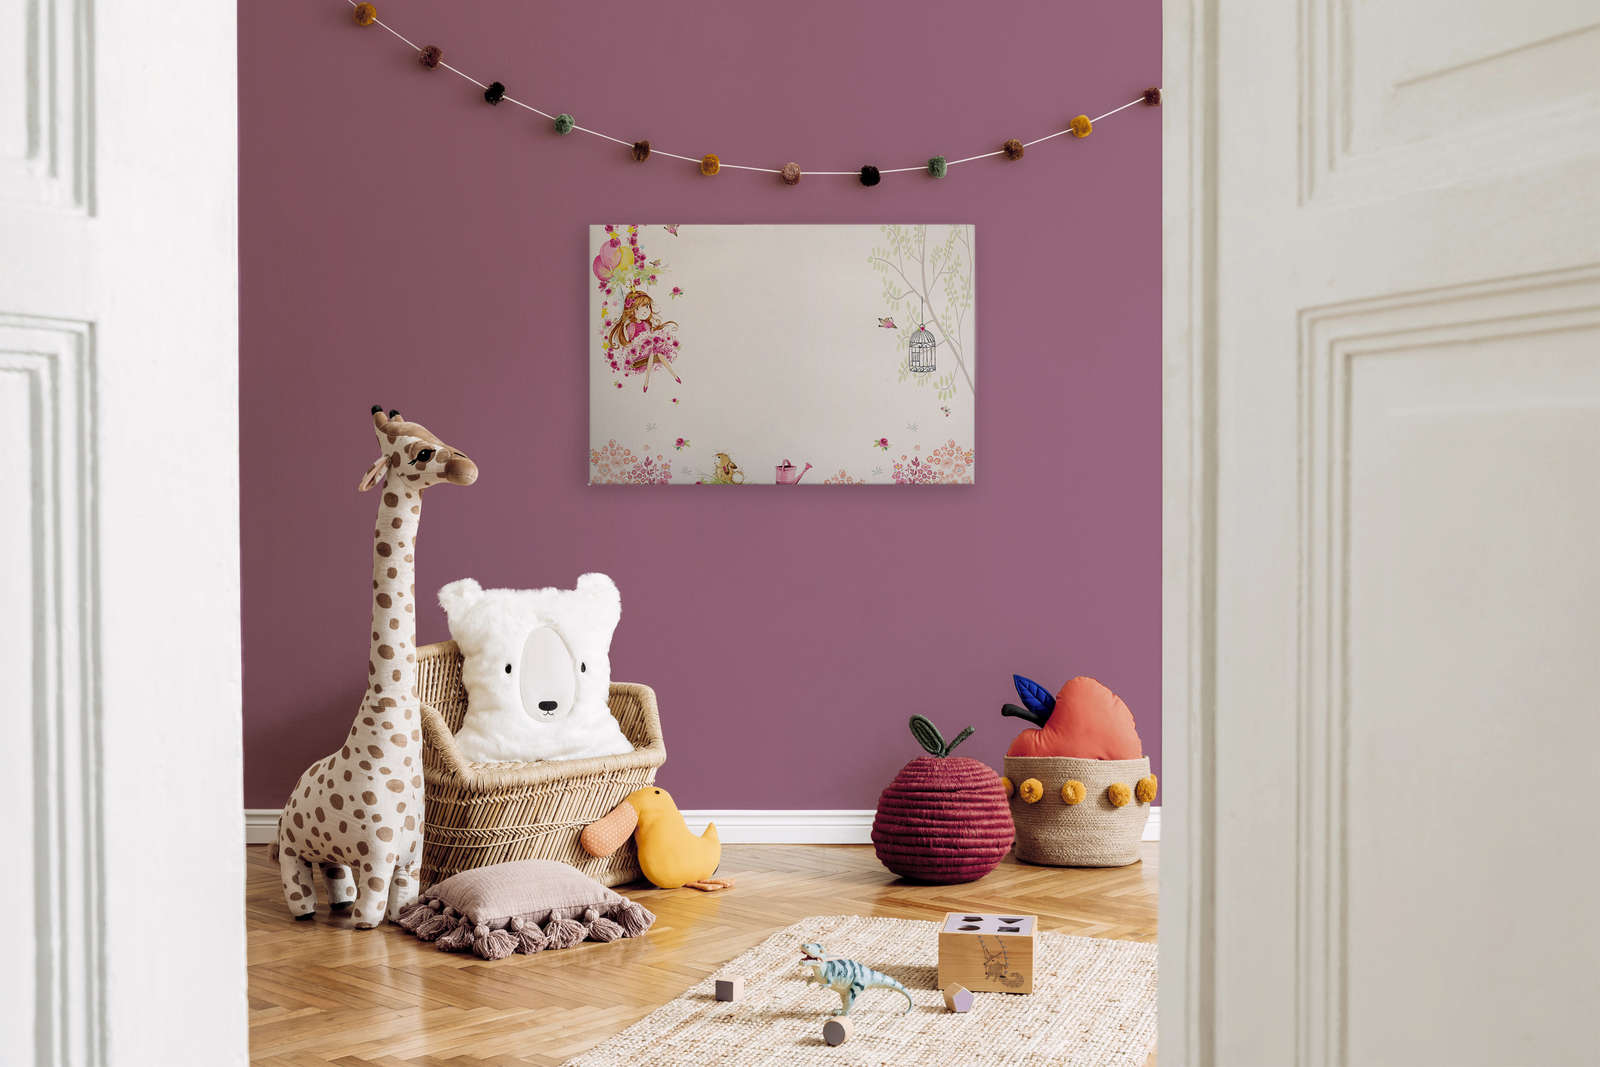             Canvas painting Nursery with princess on swing and animals - 0,90 m x 0,60 m
        